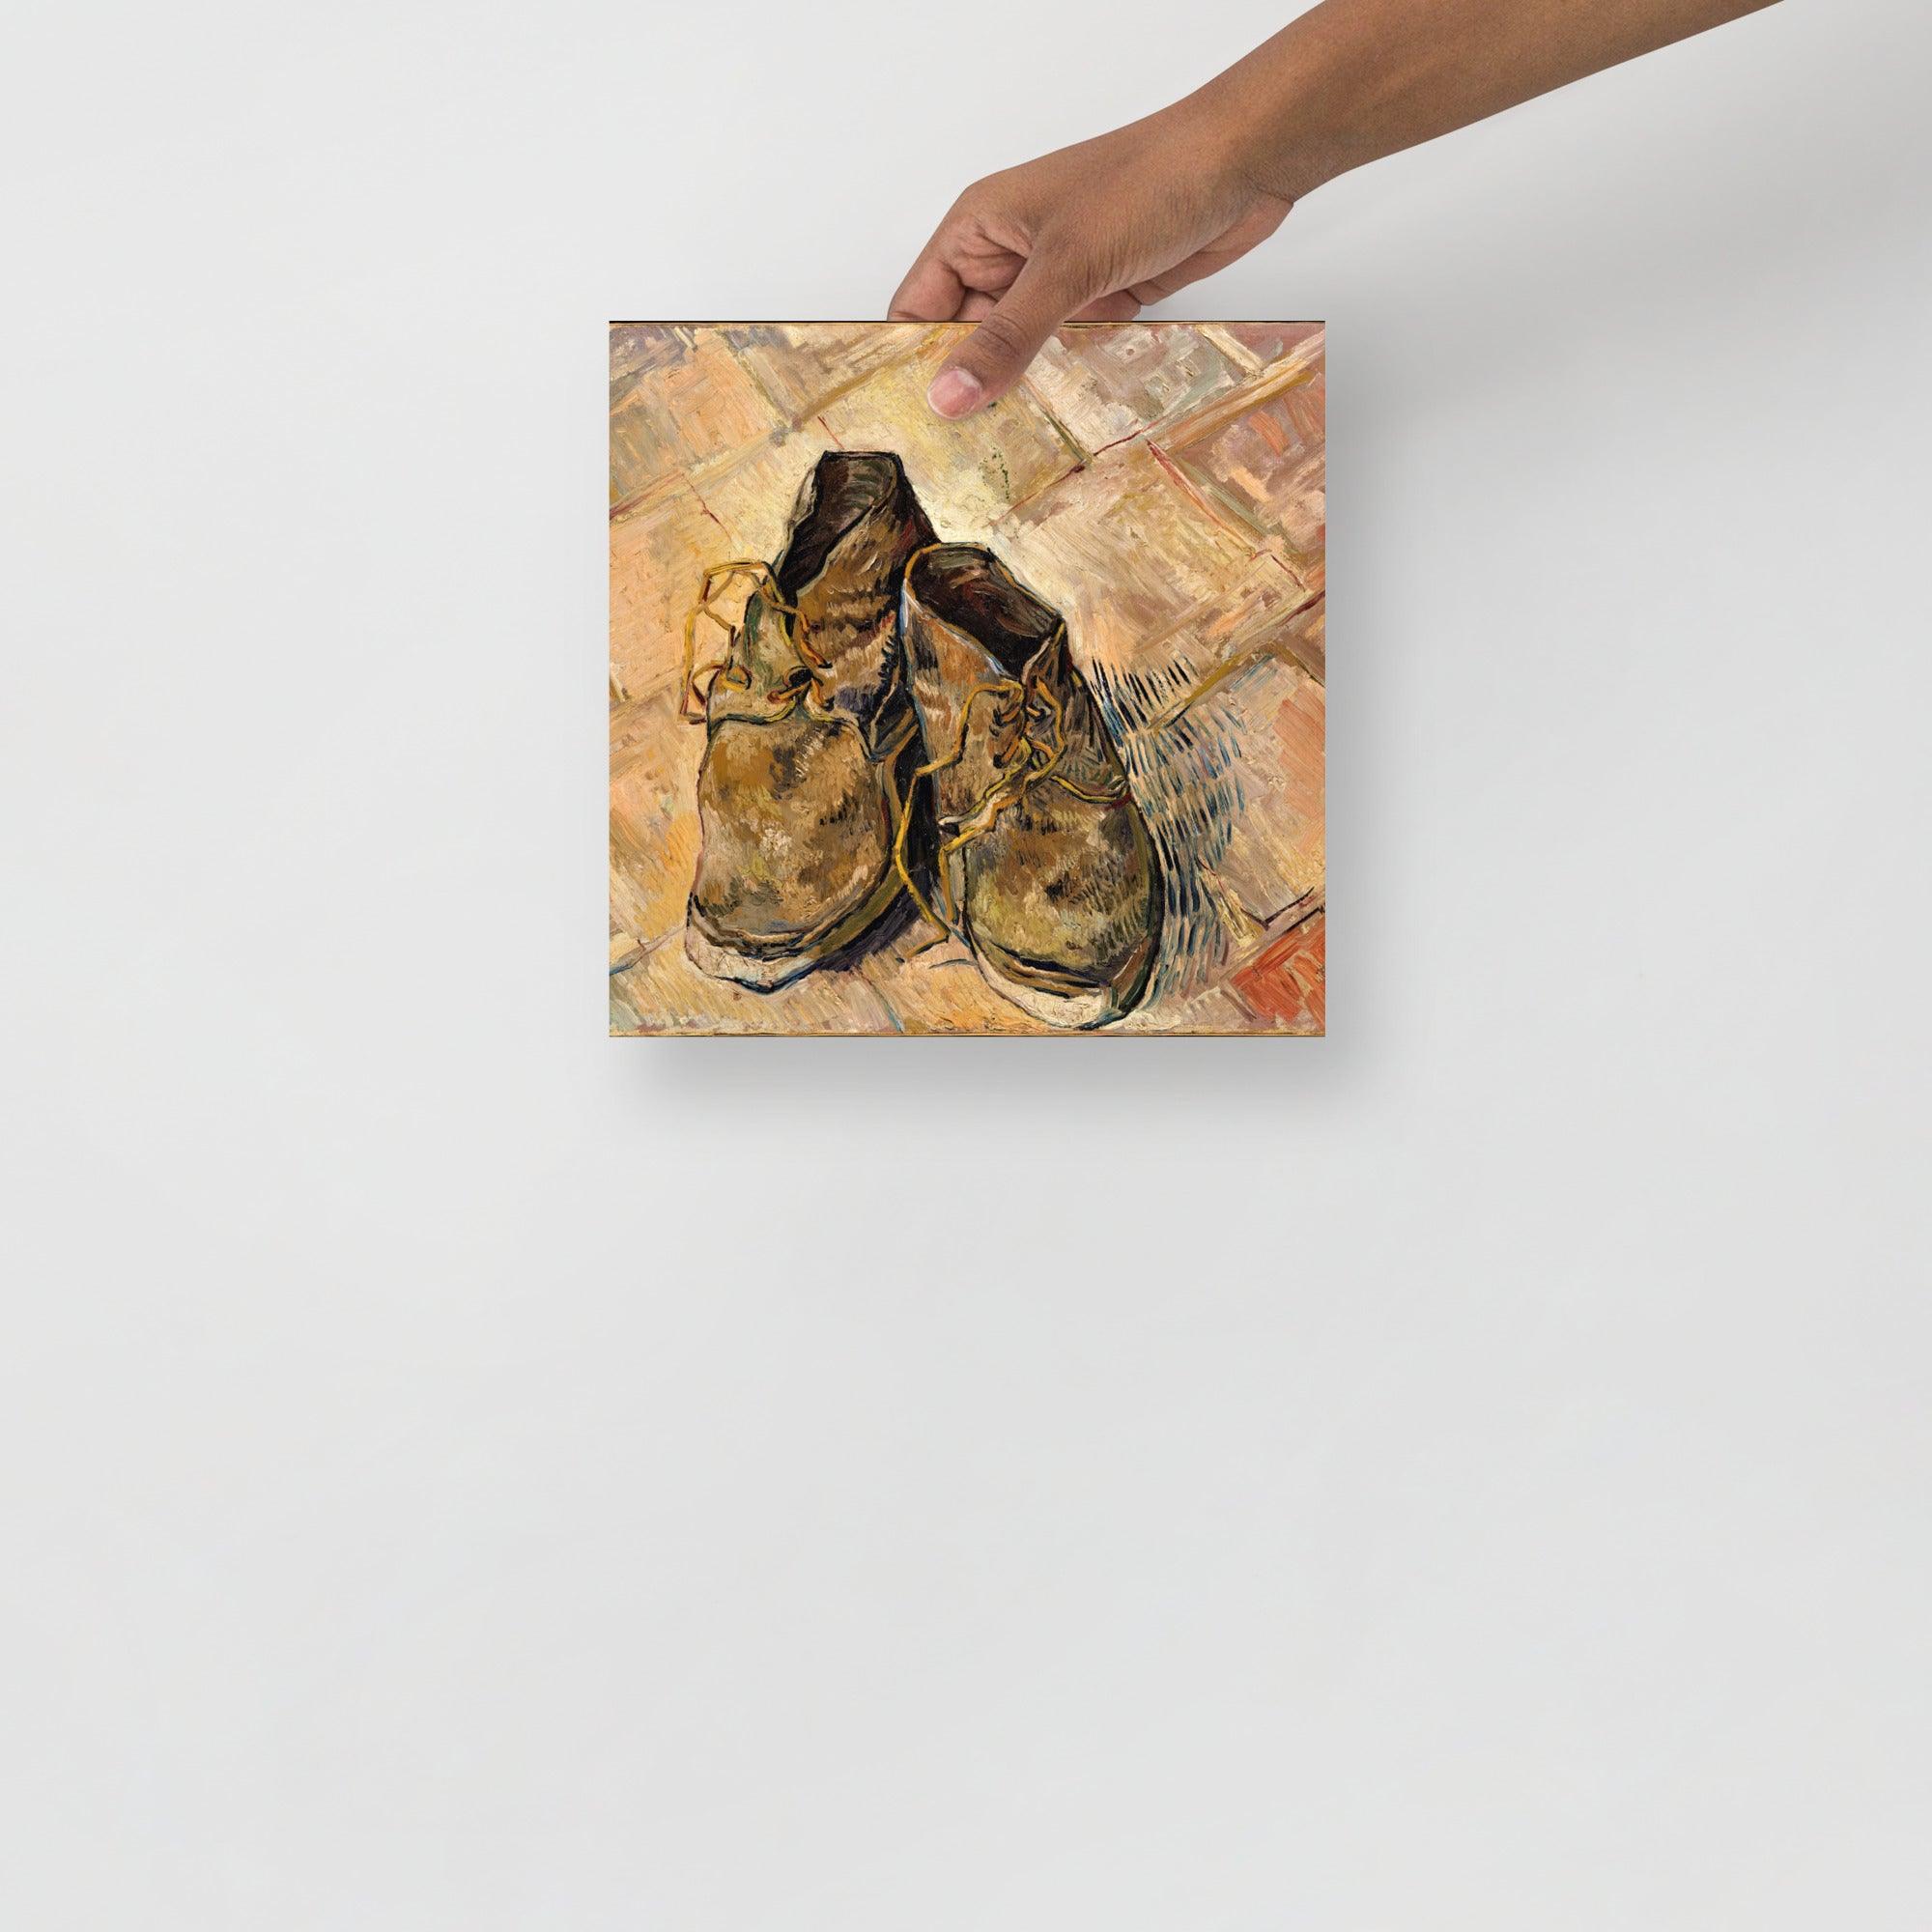 A Shoes by Vincent Van Gogh poster on a plain backdrop in size 10x10”.